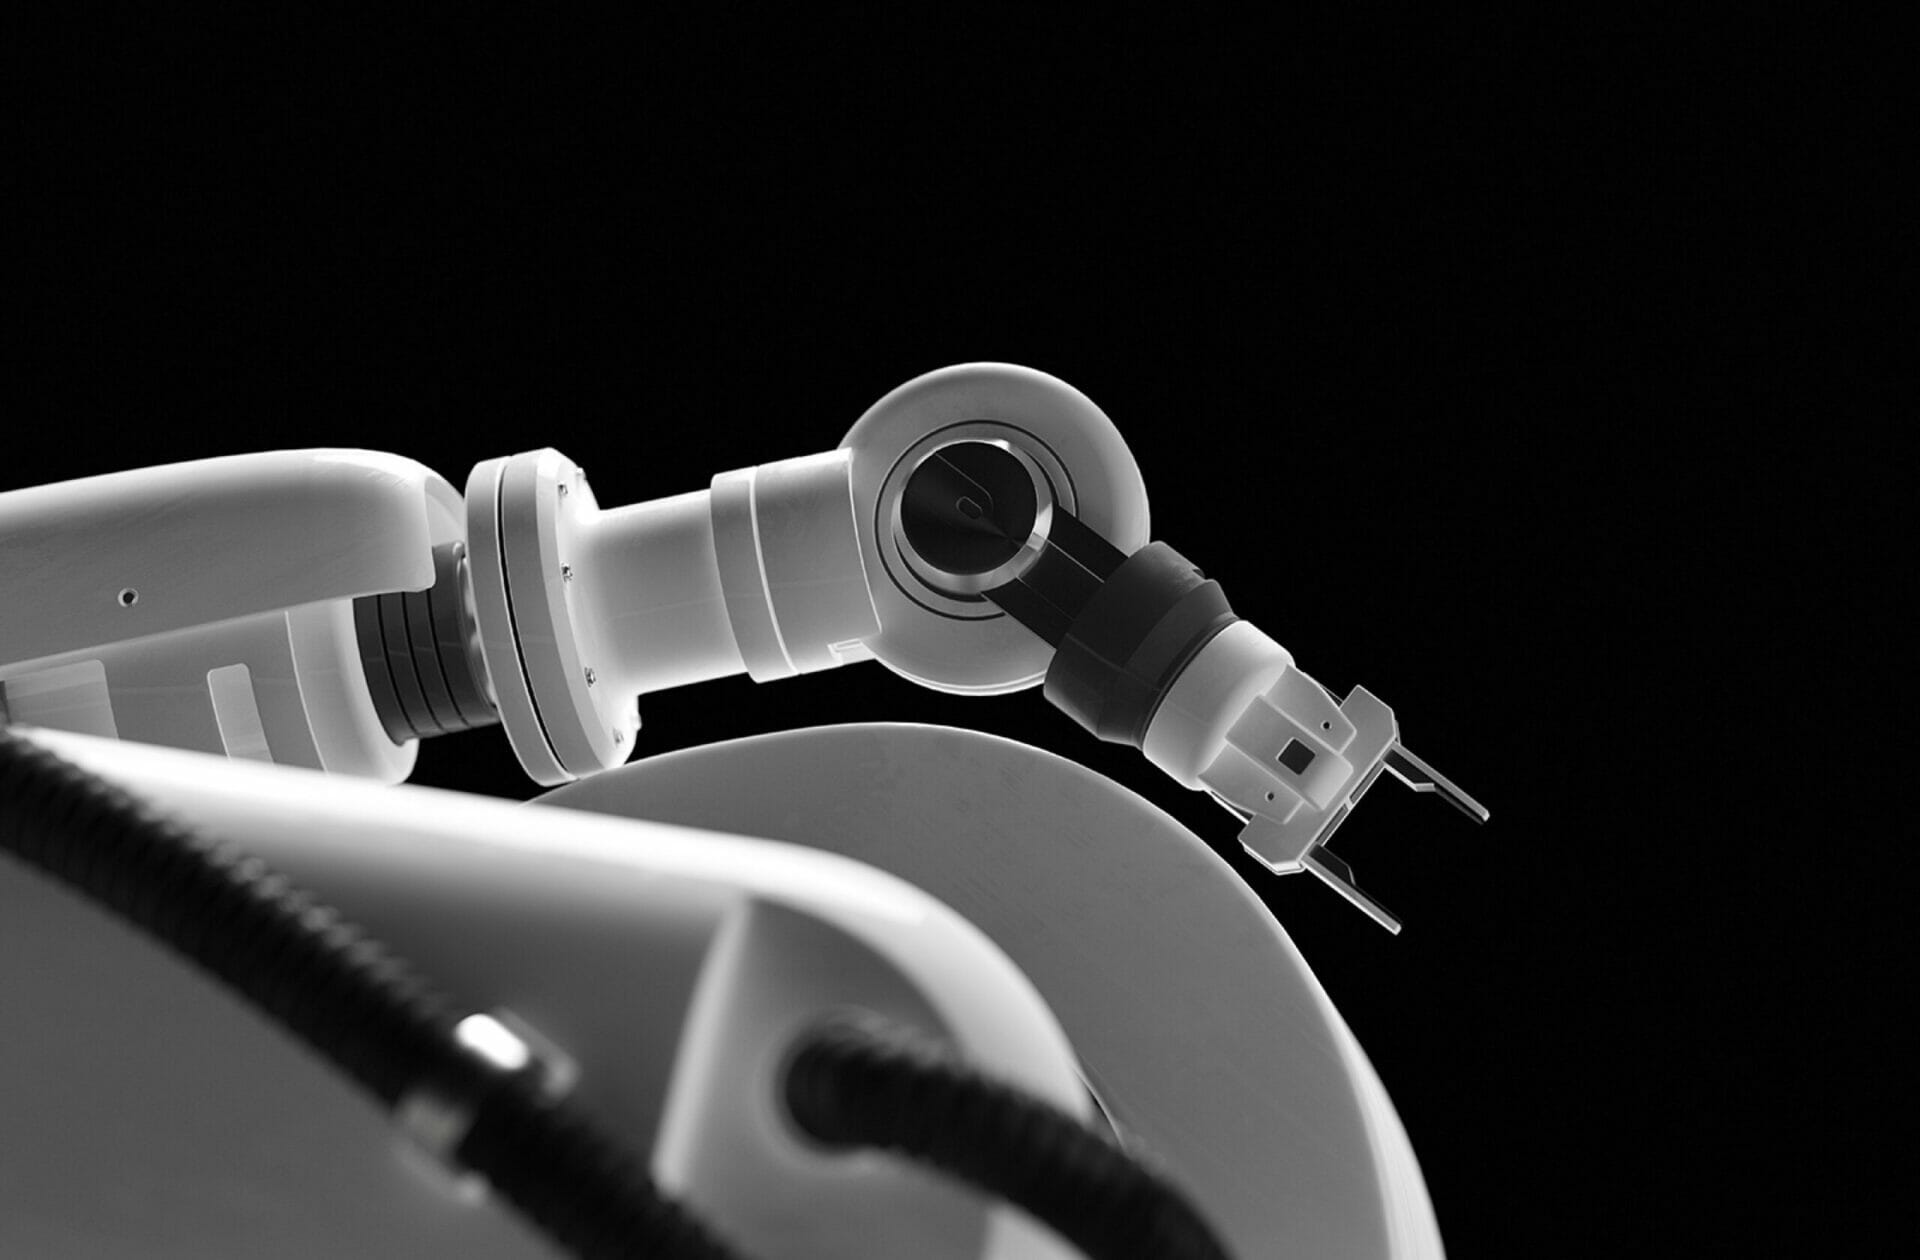 A black and white image of a robotic arm.